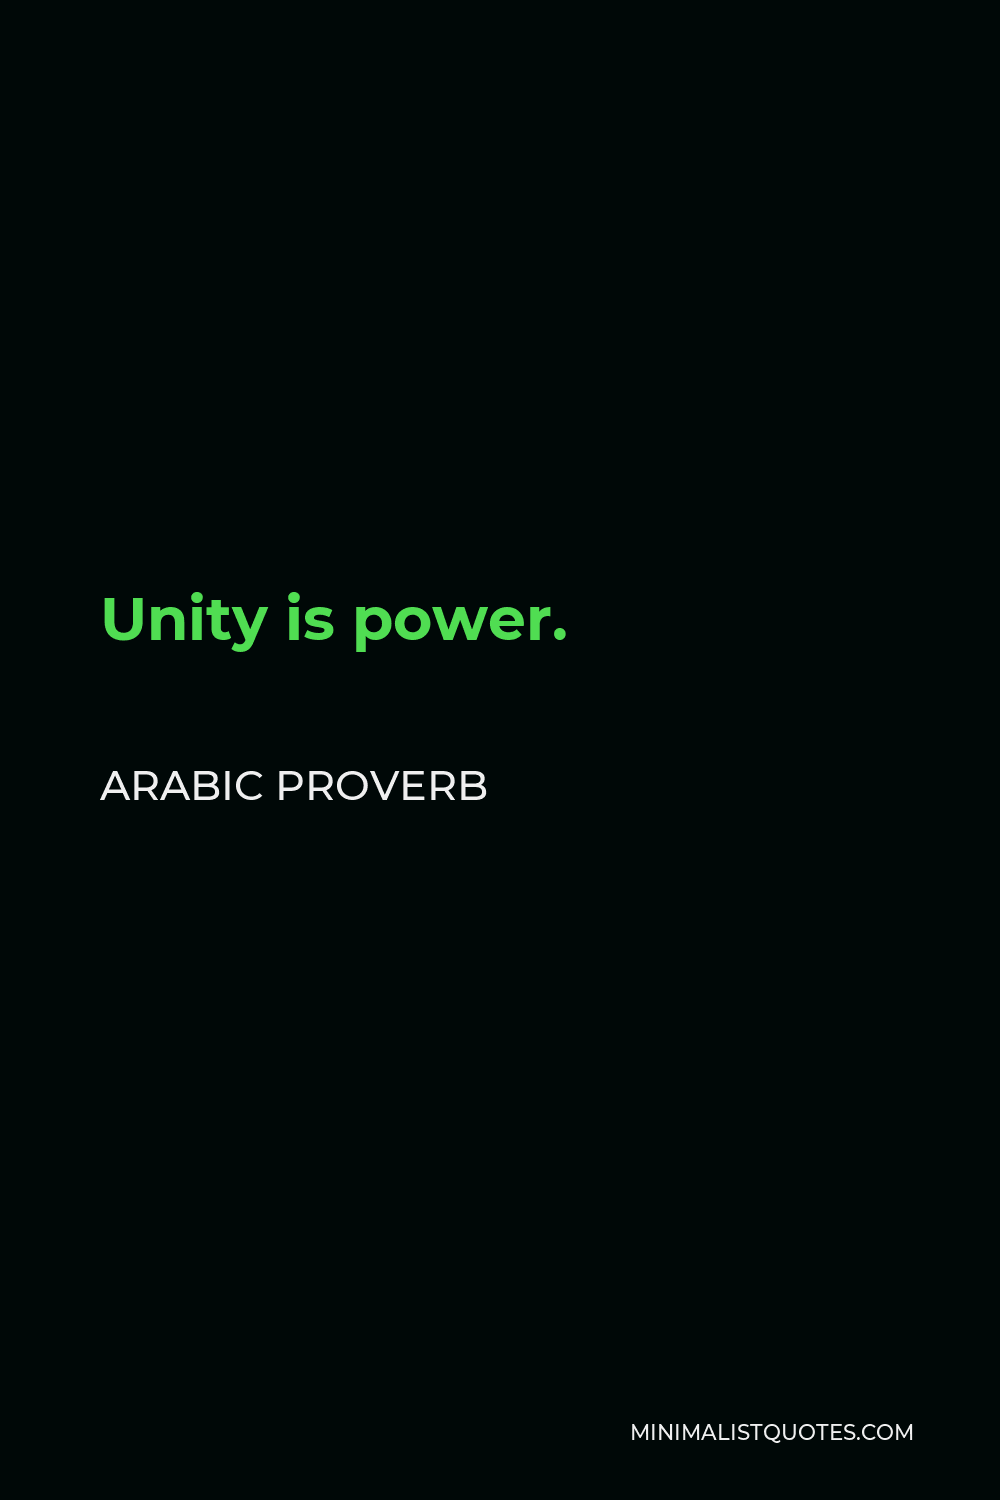 Arabic Proverb Quote - Unity is power.